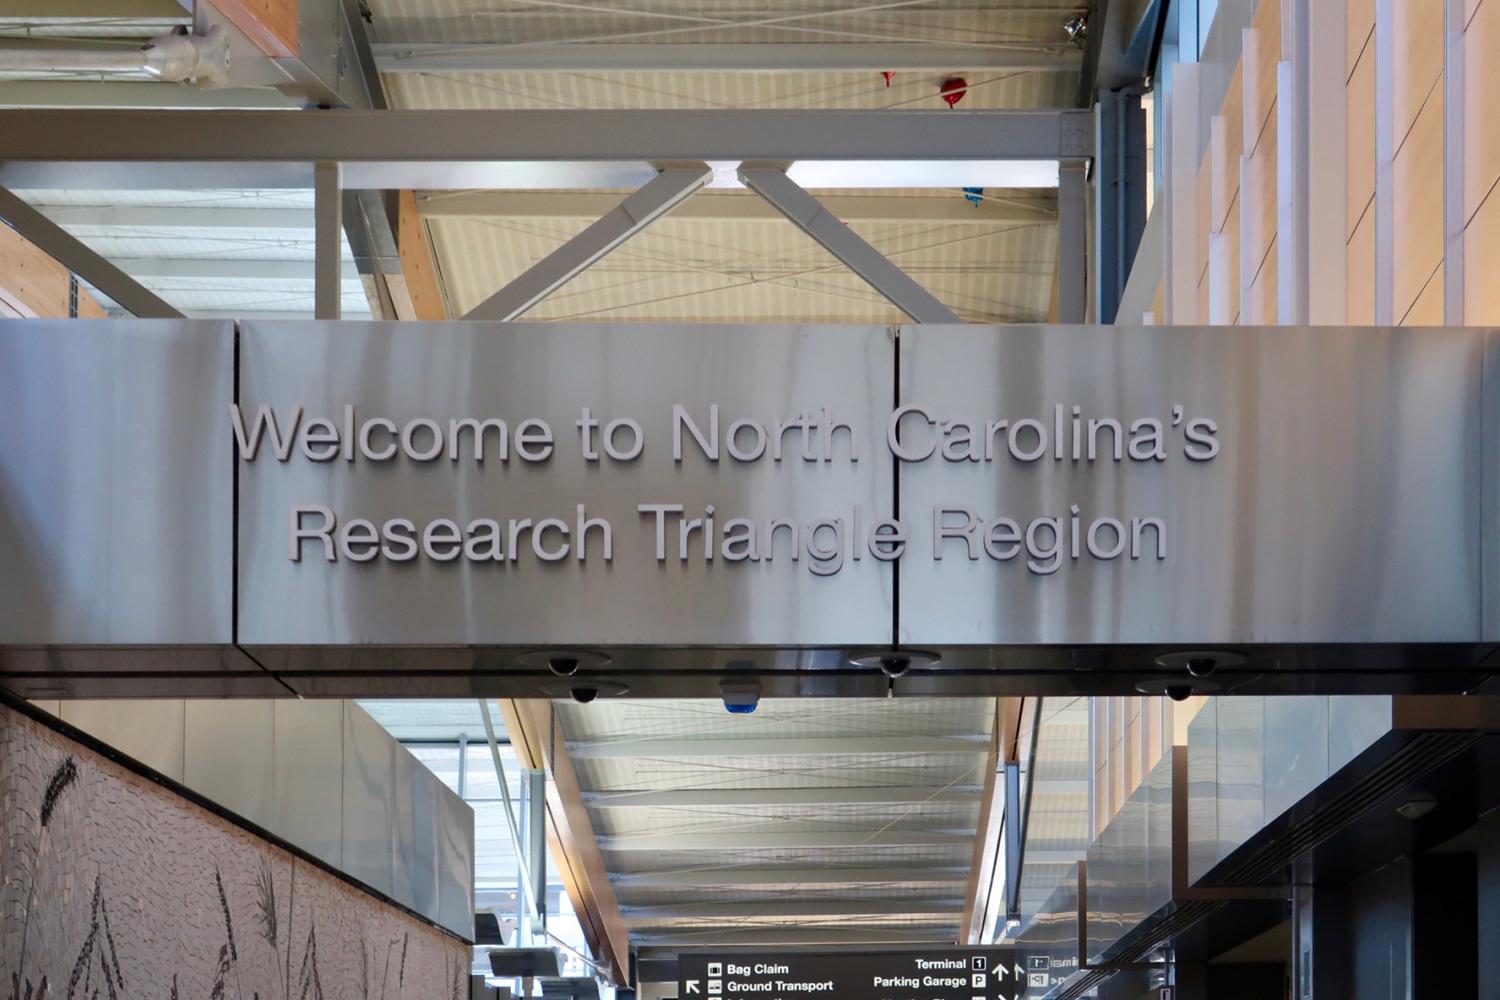 DURHAM, NC, USA - DECEMBER 24, 2019: WELCOME TO NORTH CAROLINA’S RESEARCH TRIANGLE REGION sign at RDU International Airport